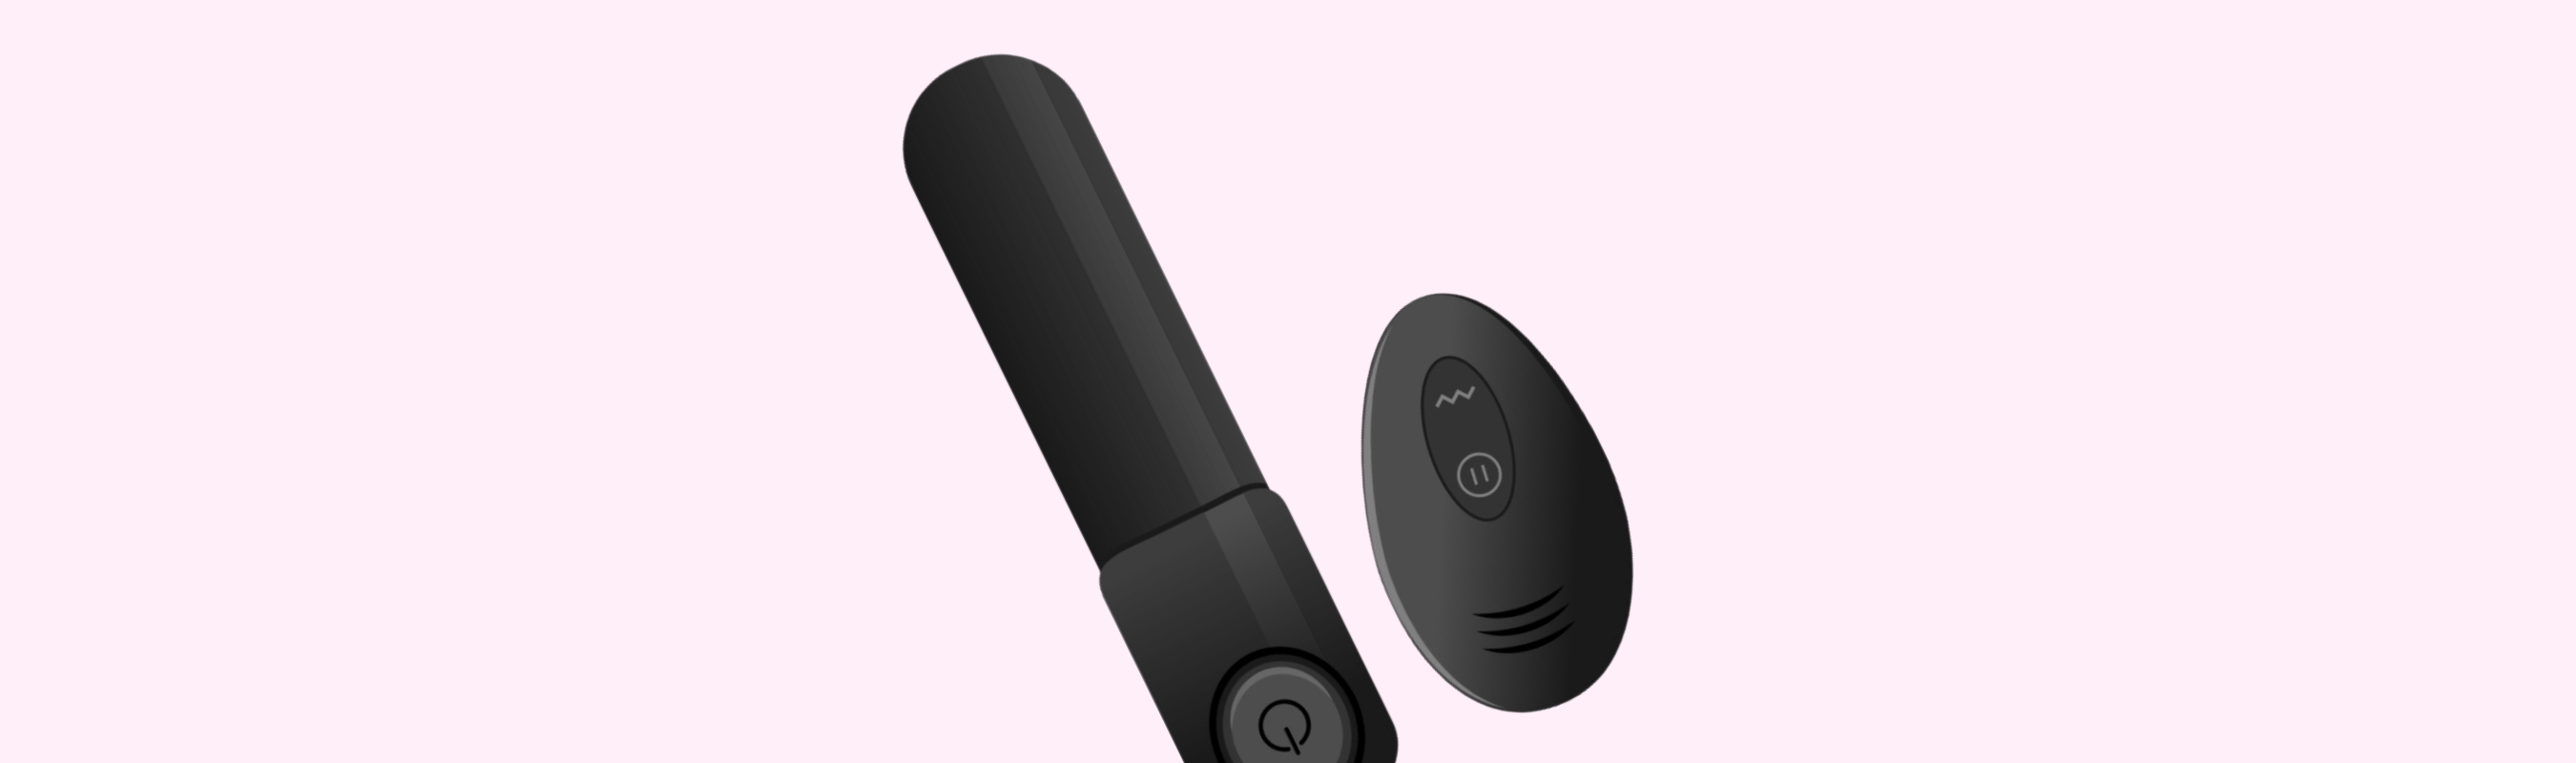 Illustration of black bullet vibrator with wireless remote